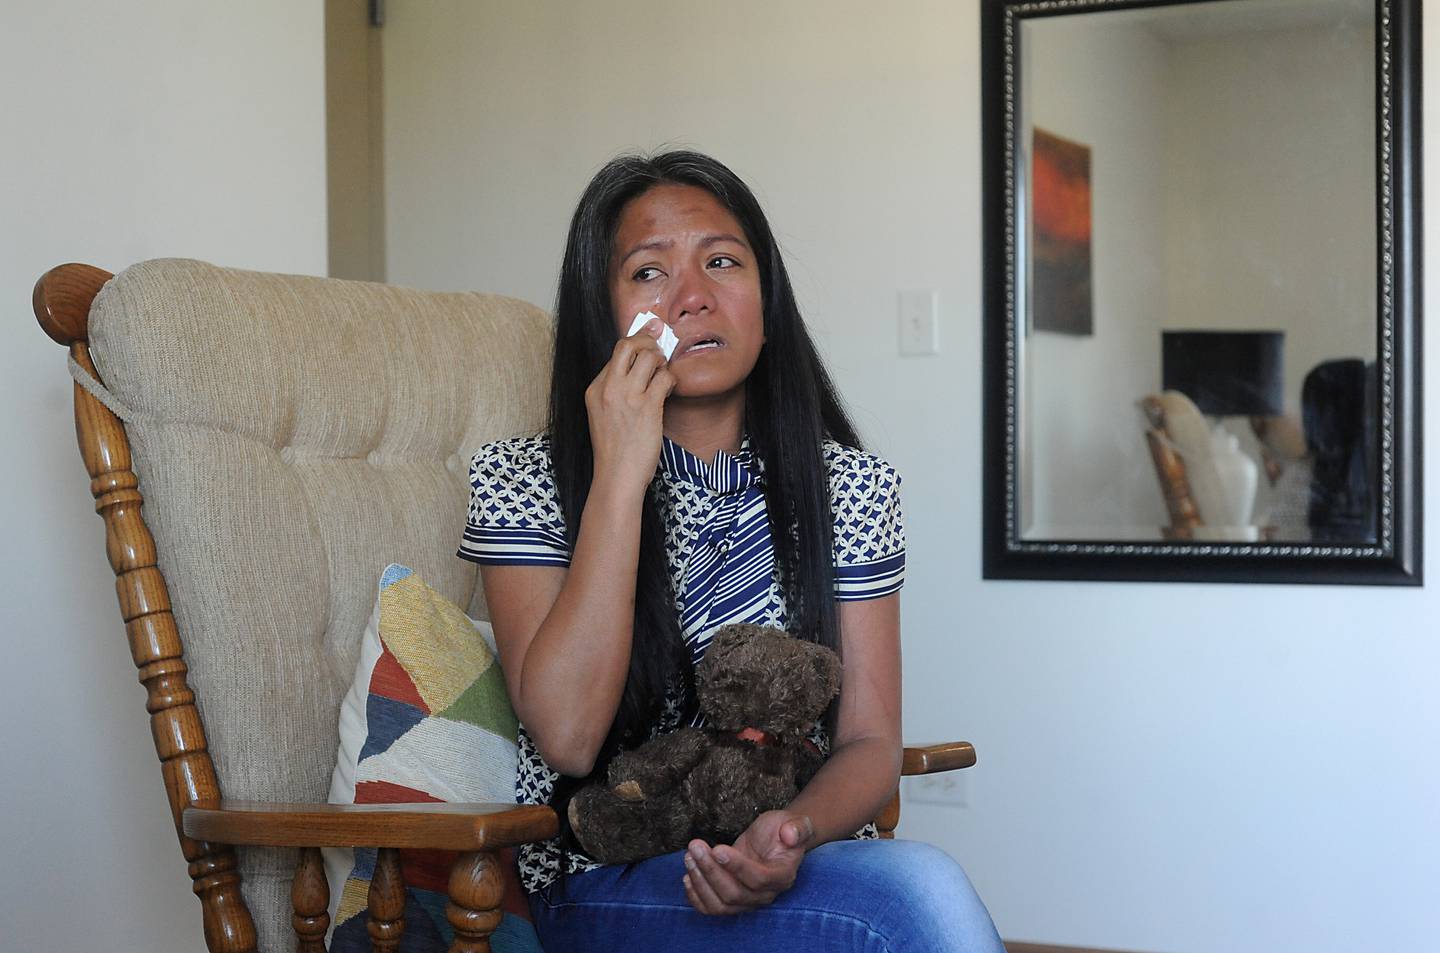 Wilma Alex wipes away tears Thursday, April 21, 2022,  at her apartment in McHenry County as she talks about being nearly killed in early March. Her husband, Mark Alex, was charged with attempted first-degree murder.